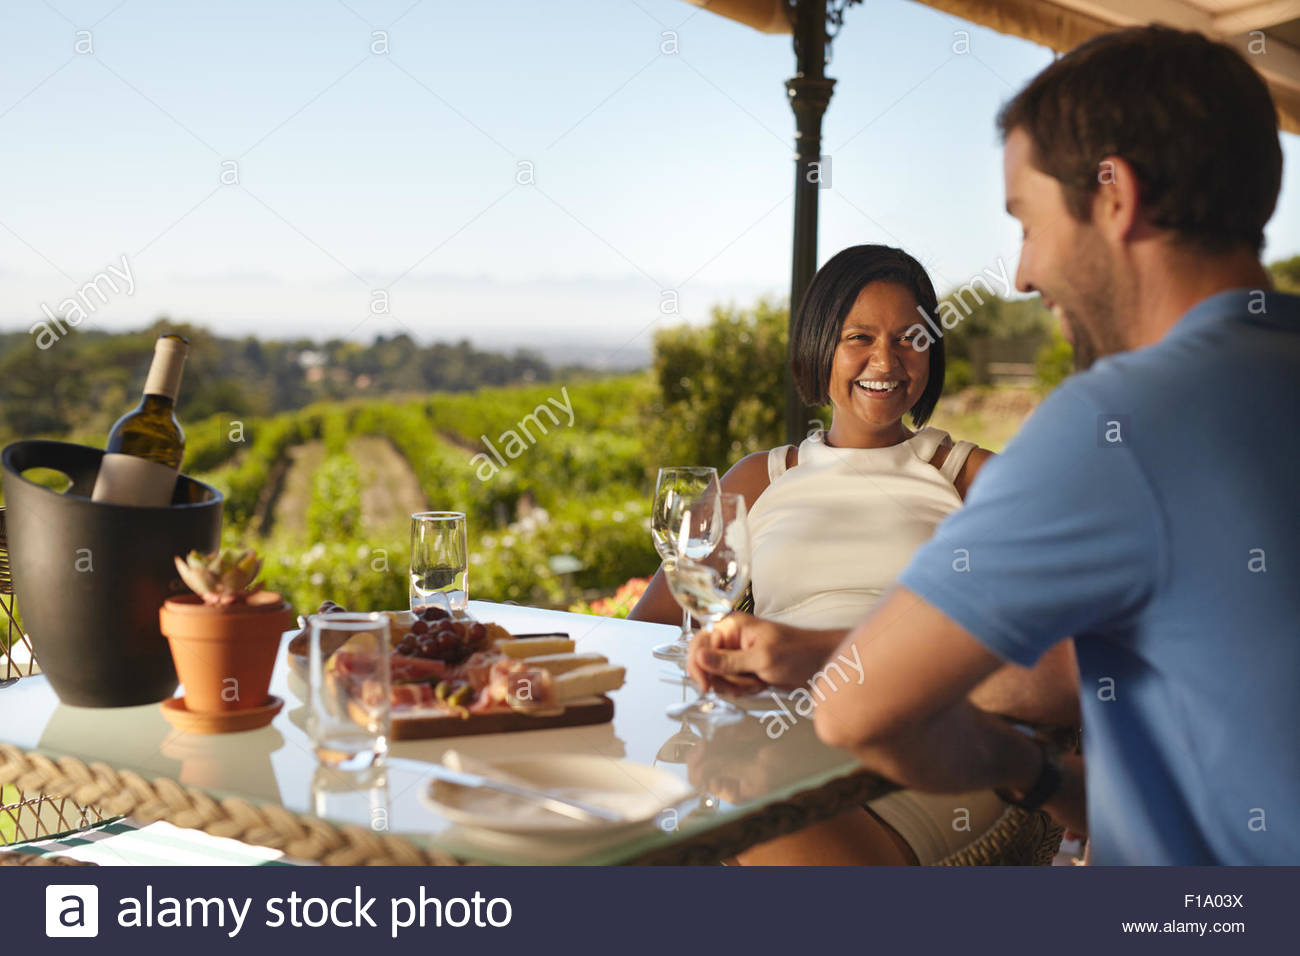 Happy Young Couple At Winery Restaurant With Vineyard In